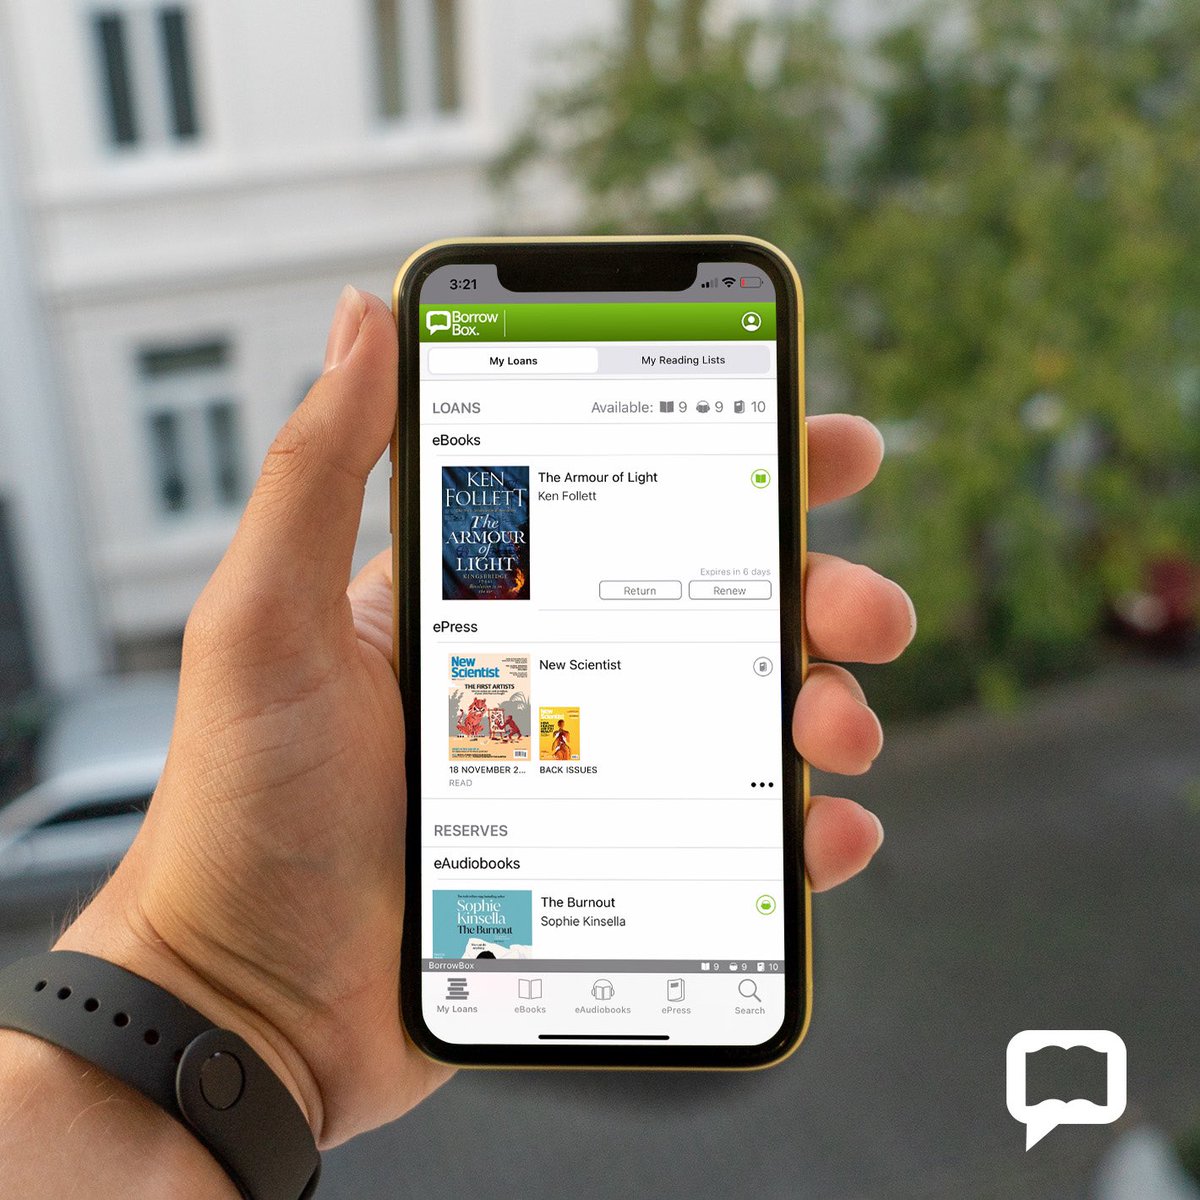 Do you love BorrowBox? Well, you’re about to love it even more! From May 1st you’ll also be able to get magazines and newspapers on there too – keep an eye out for the new ePress section.